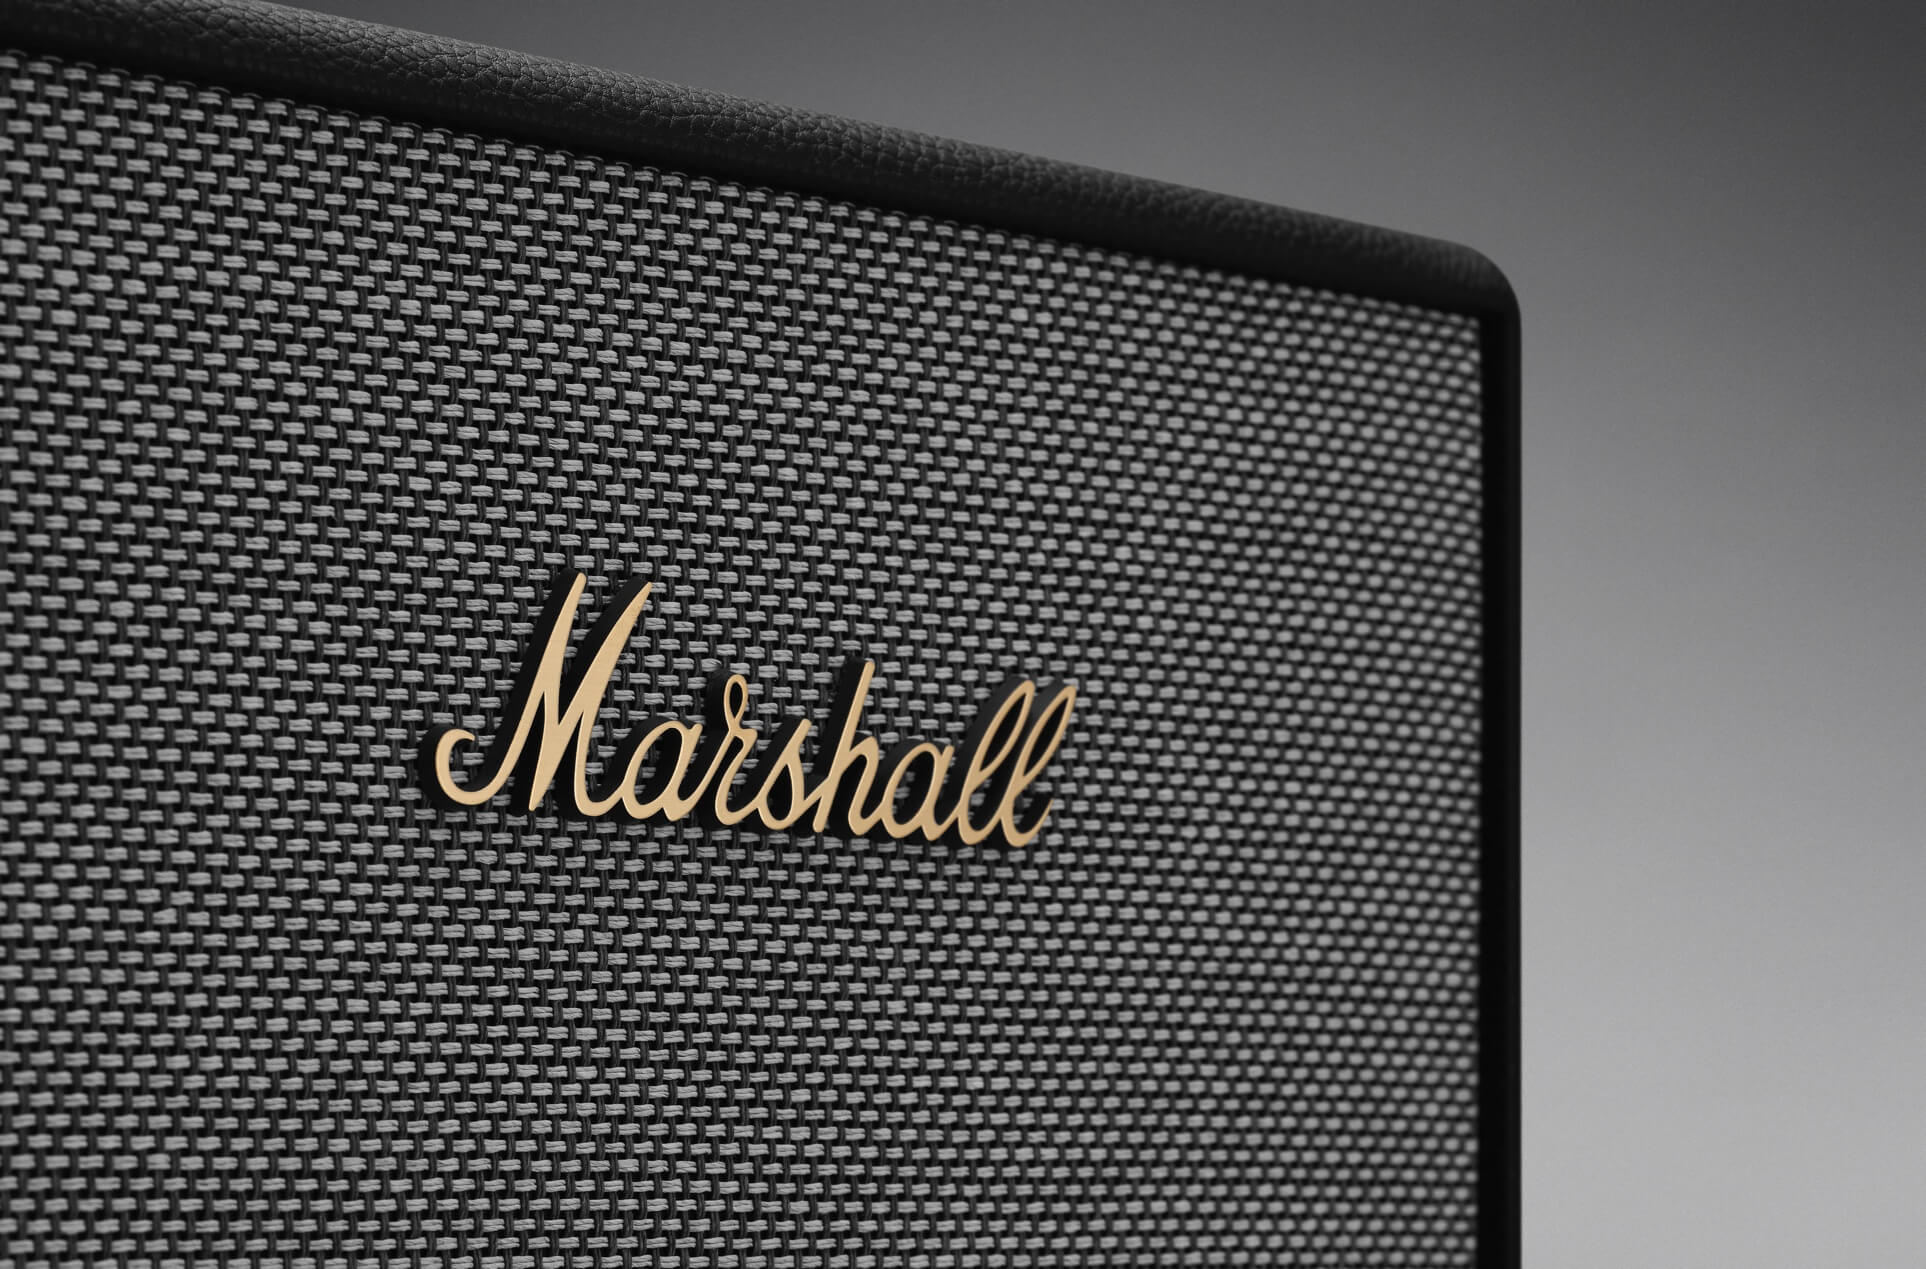 Stylish and classy: Marshall Stanmore II Bluetooth speaker biggest Cyber  Monday discount - PhoneArena